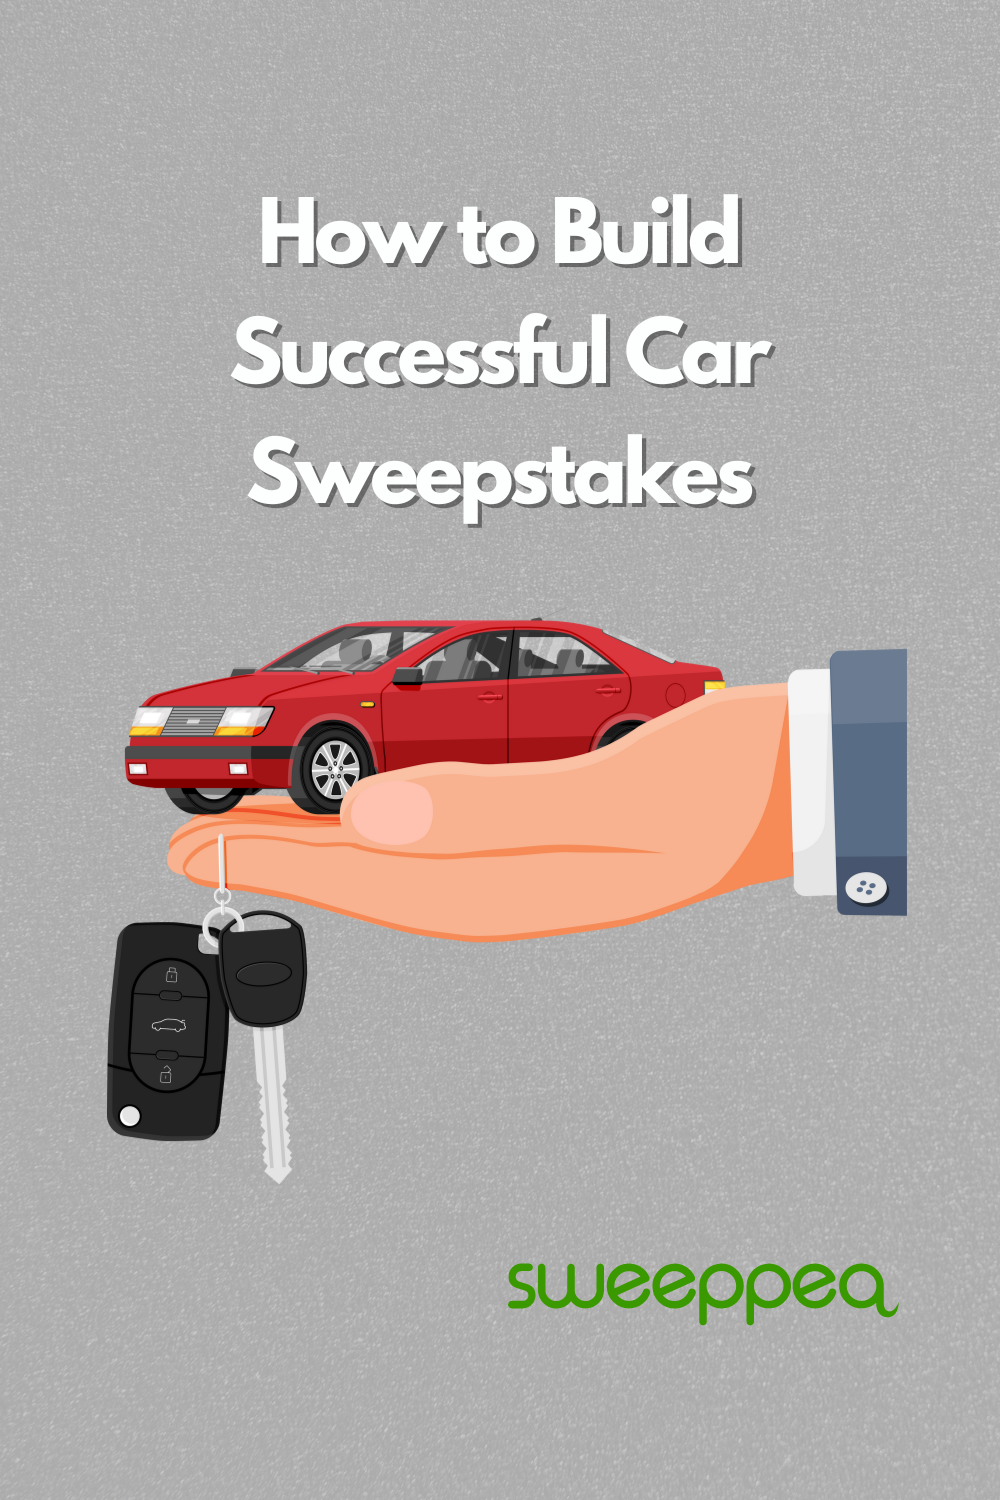 car sweepstakes article image